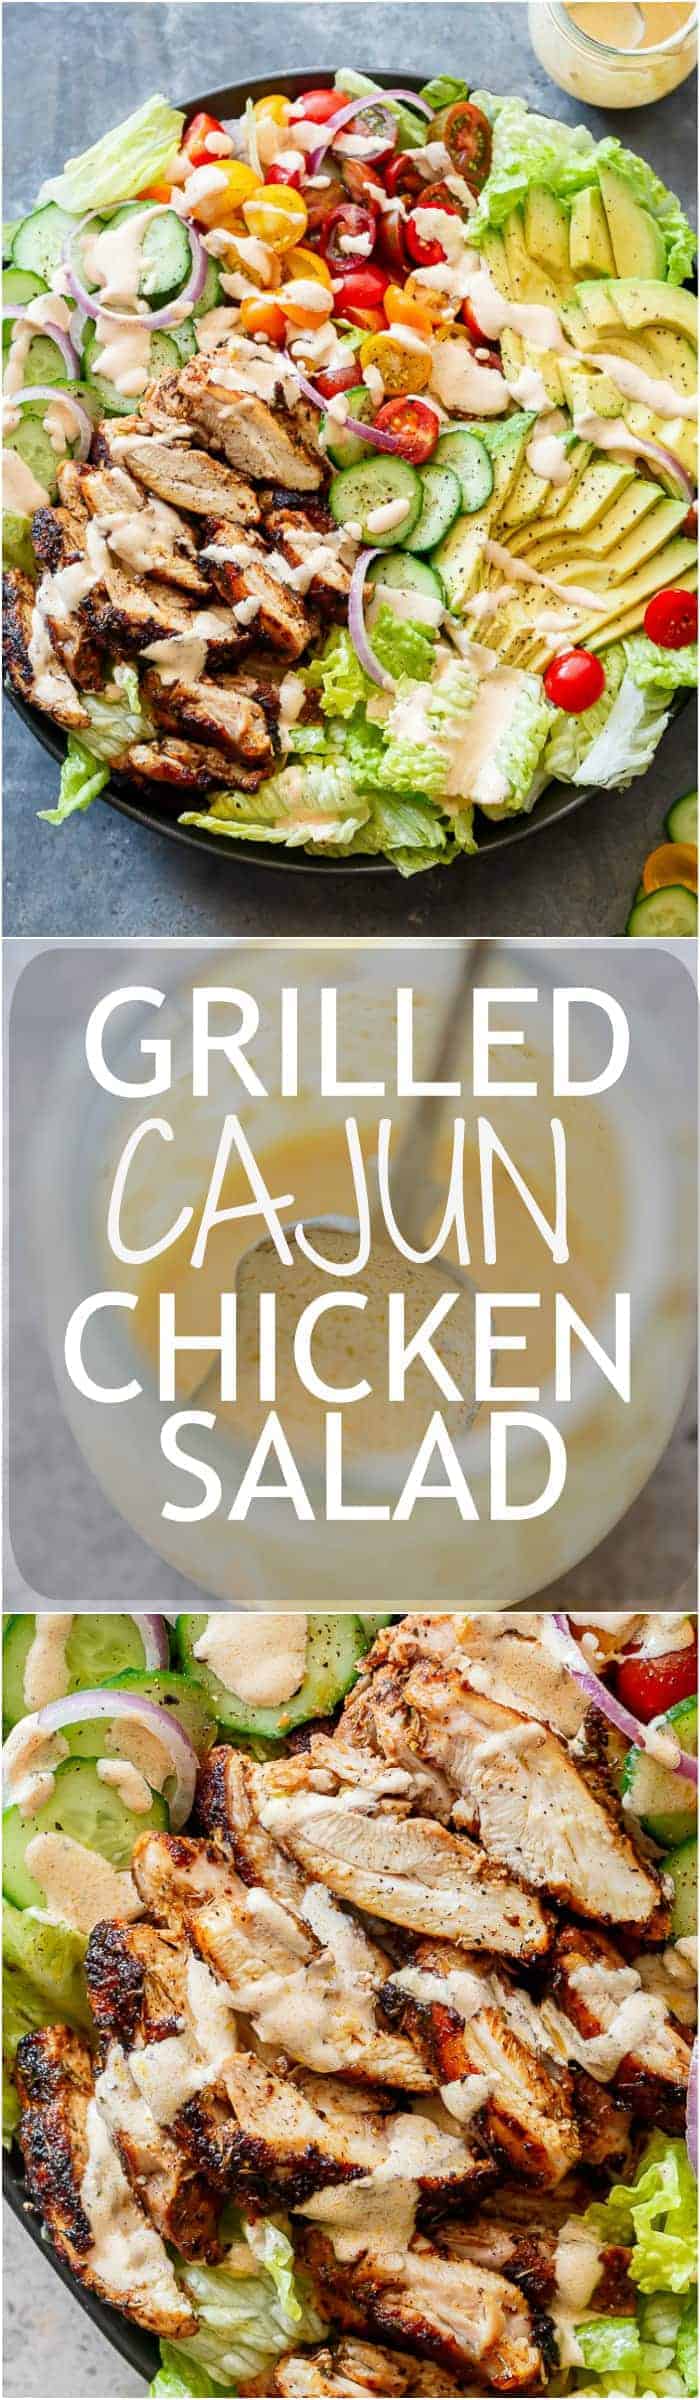 A Cajun Chicken Salad with a homemade Cajun spice seasoning and the most incredible creamy cajun dressing to put out the fire (so to speak)!